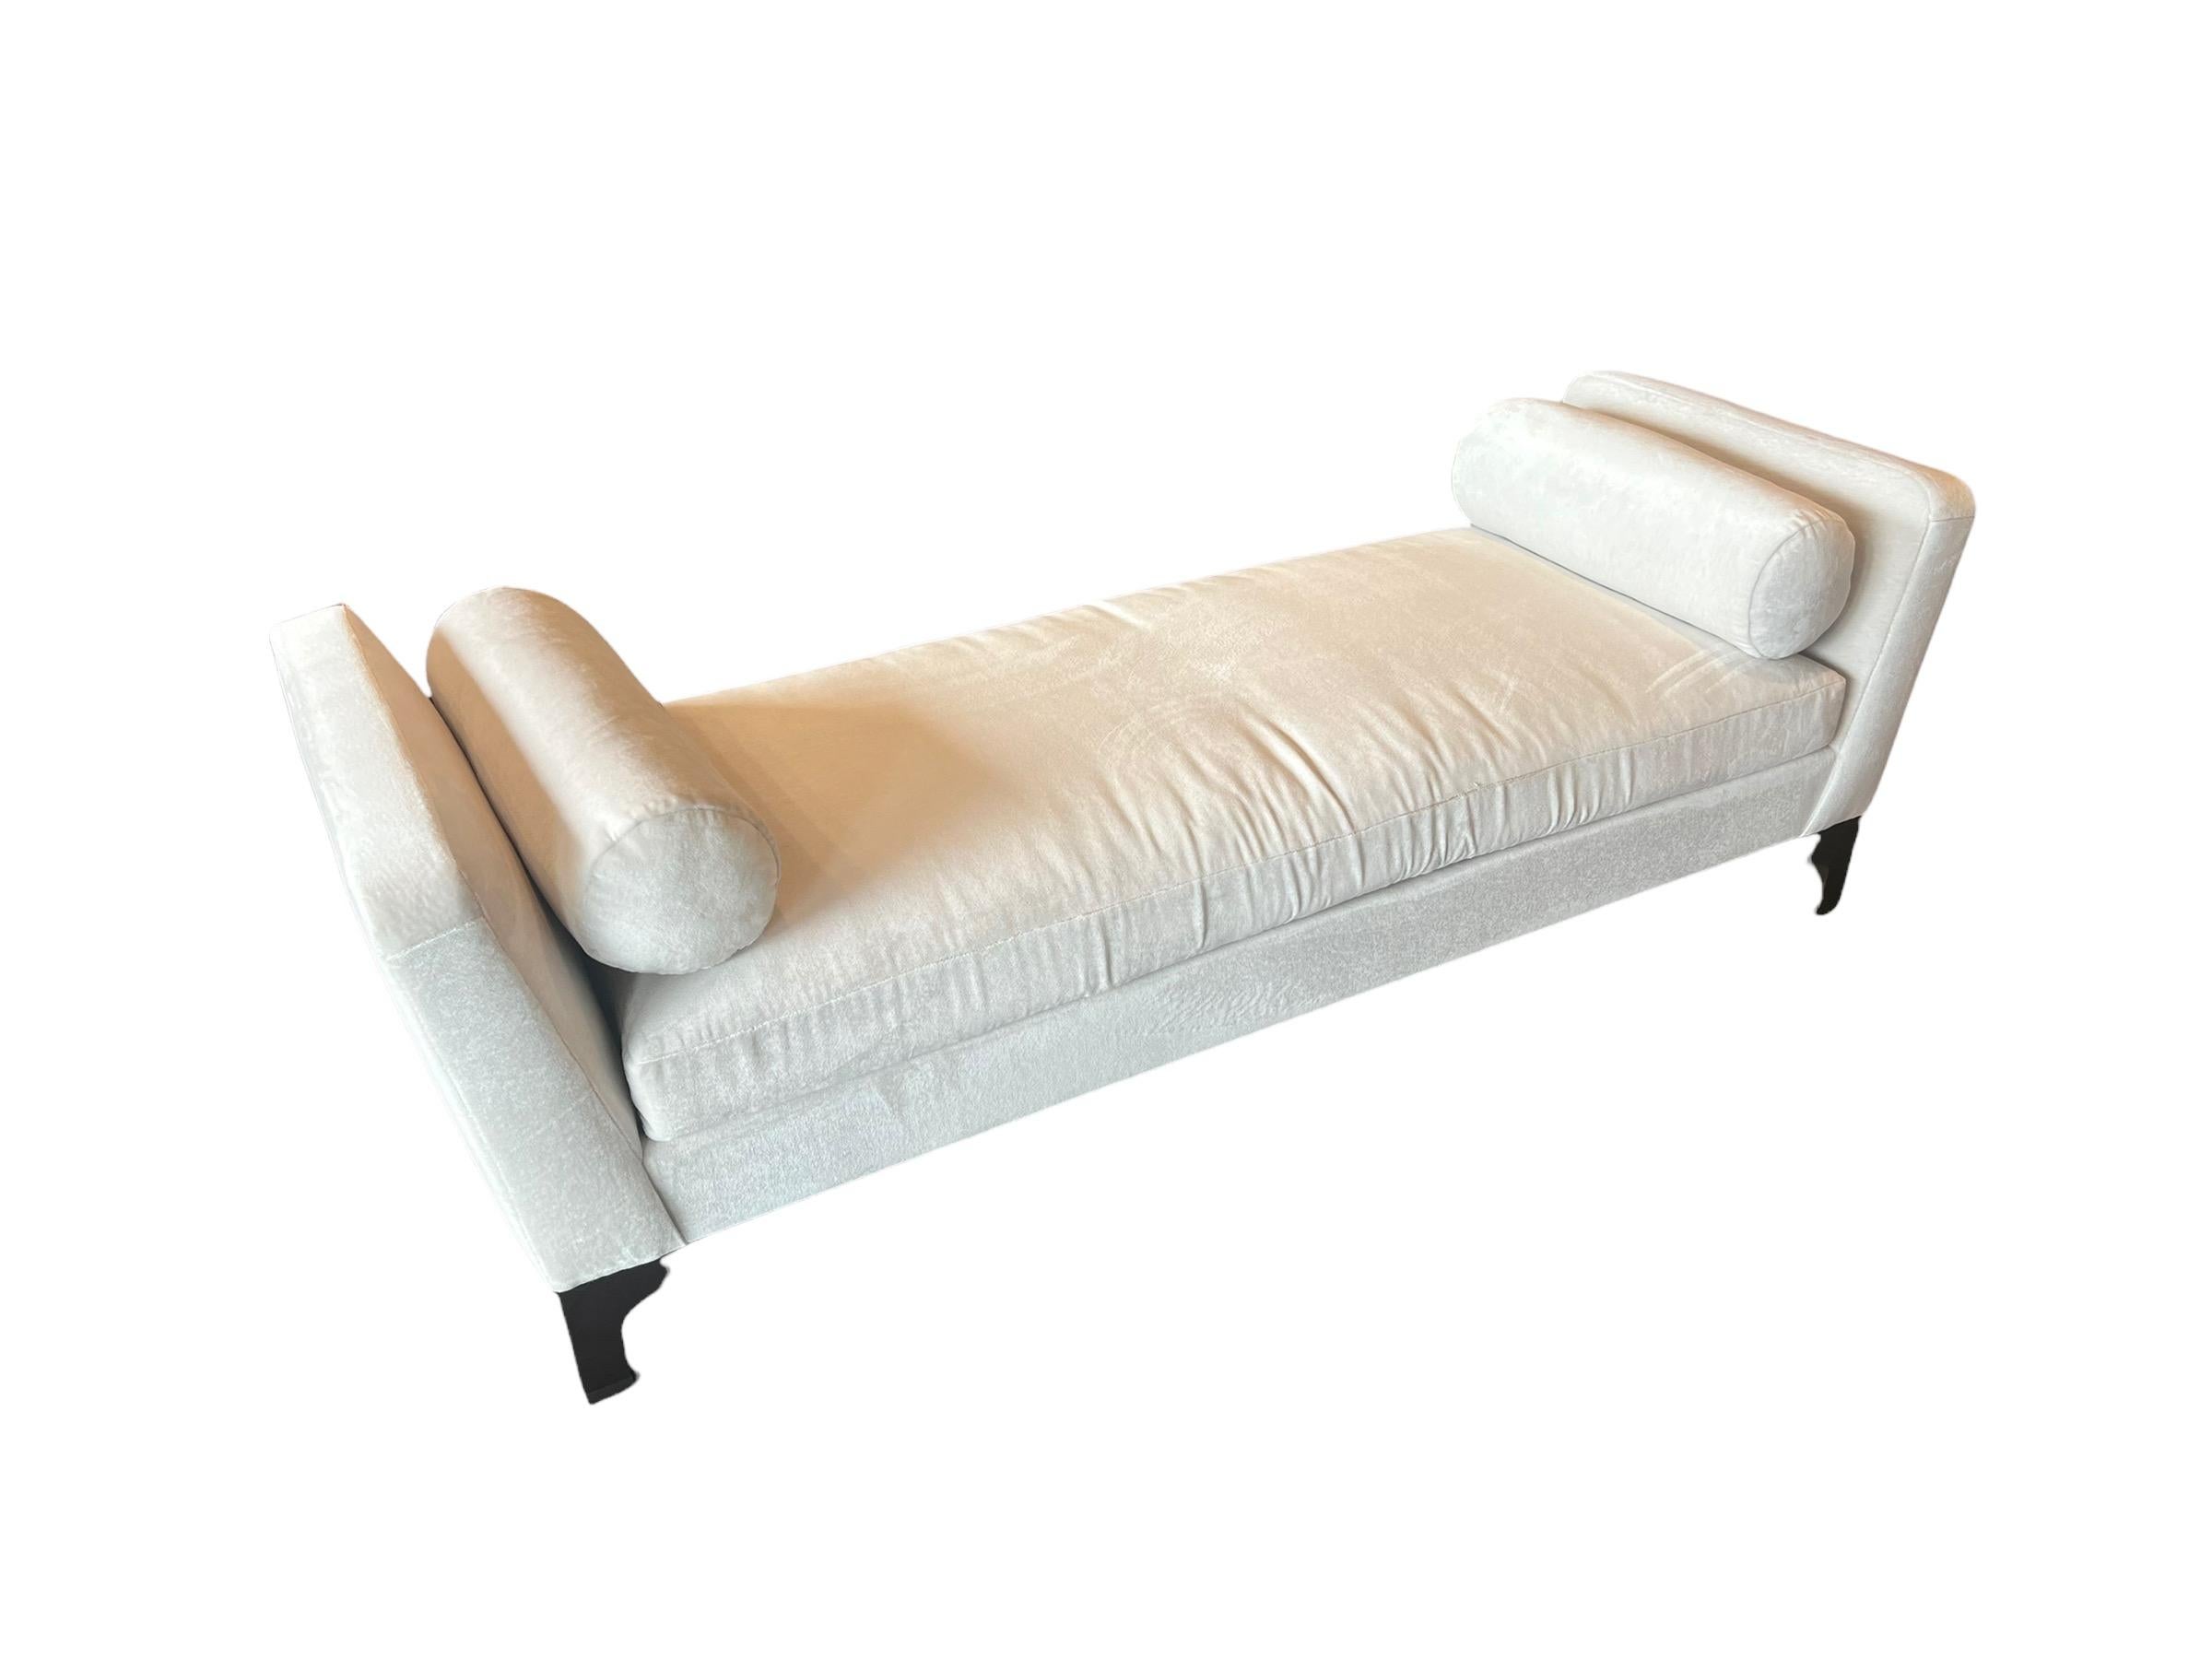 Contemporary Slipper Bench Designed by Ralph Rucci for Holly Hunt 2